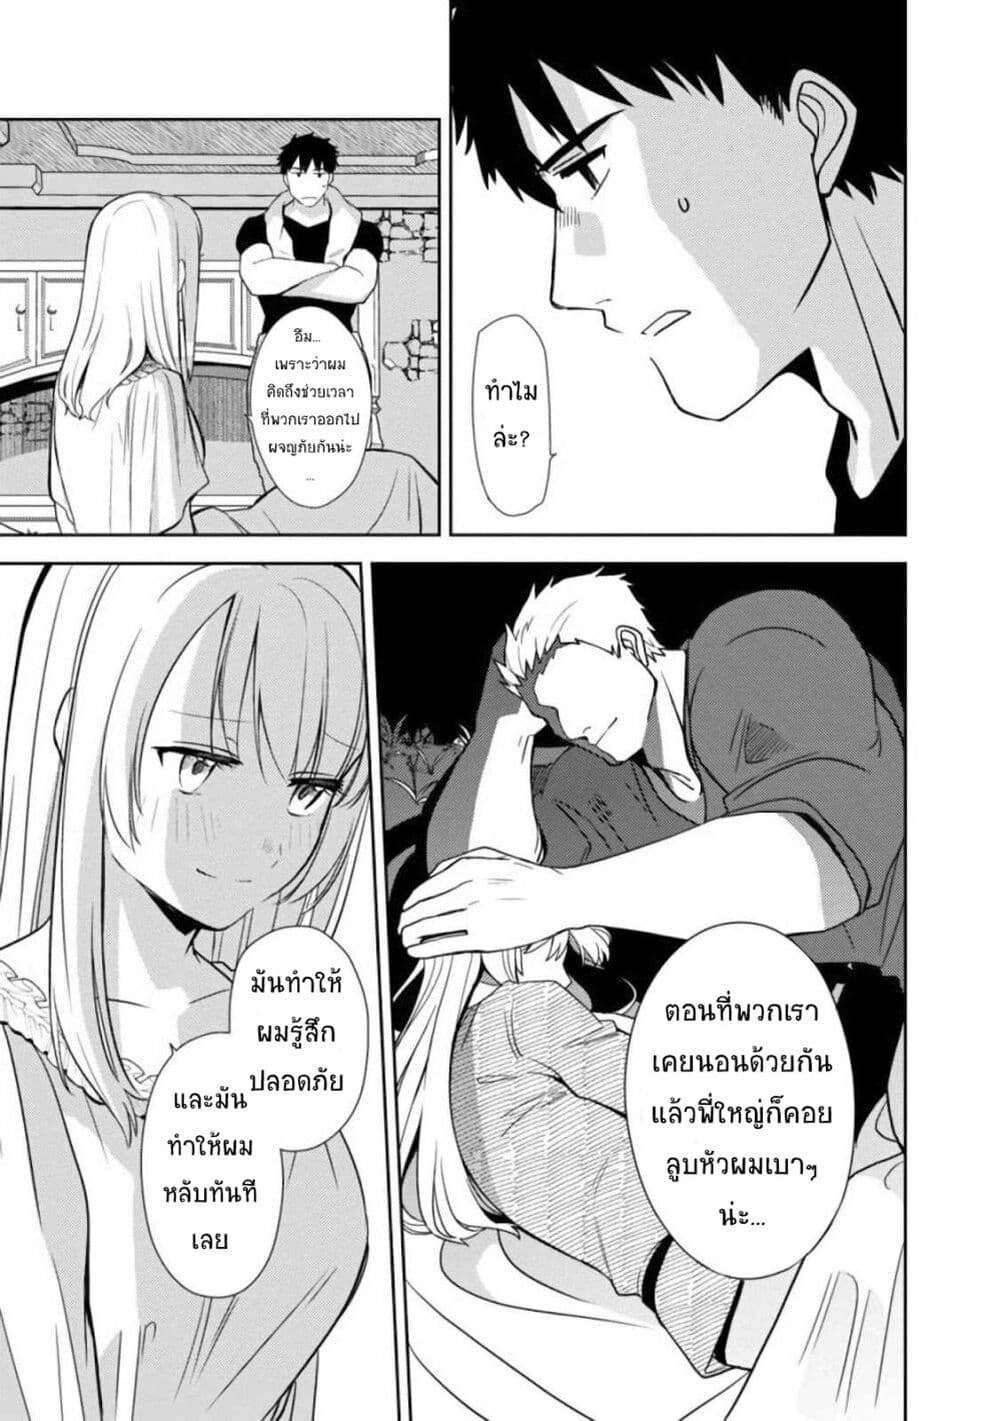 The Reincarnated Swordsman With 9999 Strength Wants to Become a Magician! ตอนที่ 2.2 (7)